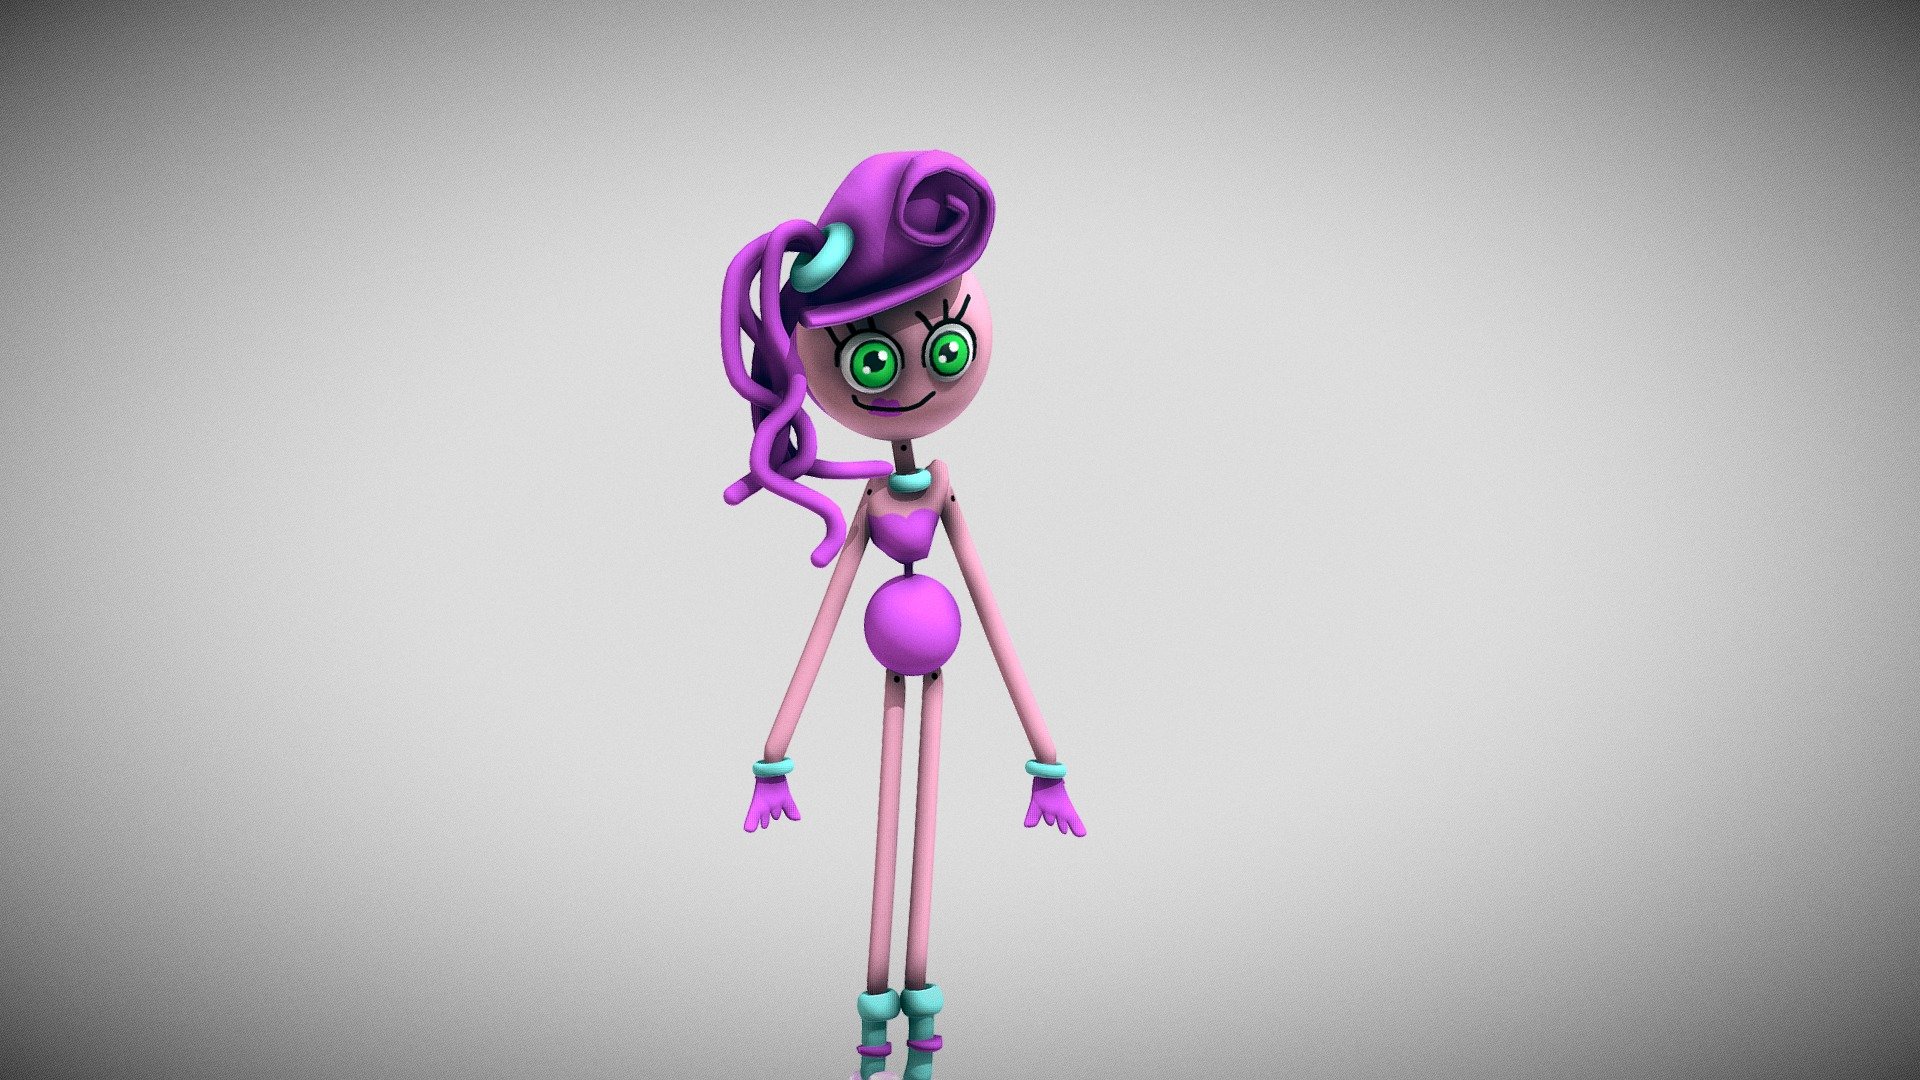 Mommy Long Legs - Poppy Playtime Chapter 2 - Download Free 3D model by  Valcopp [d12a328] - Sketchfab